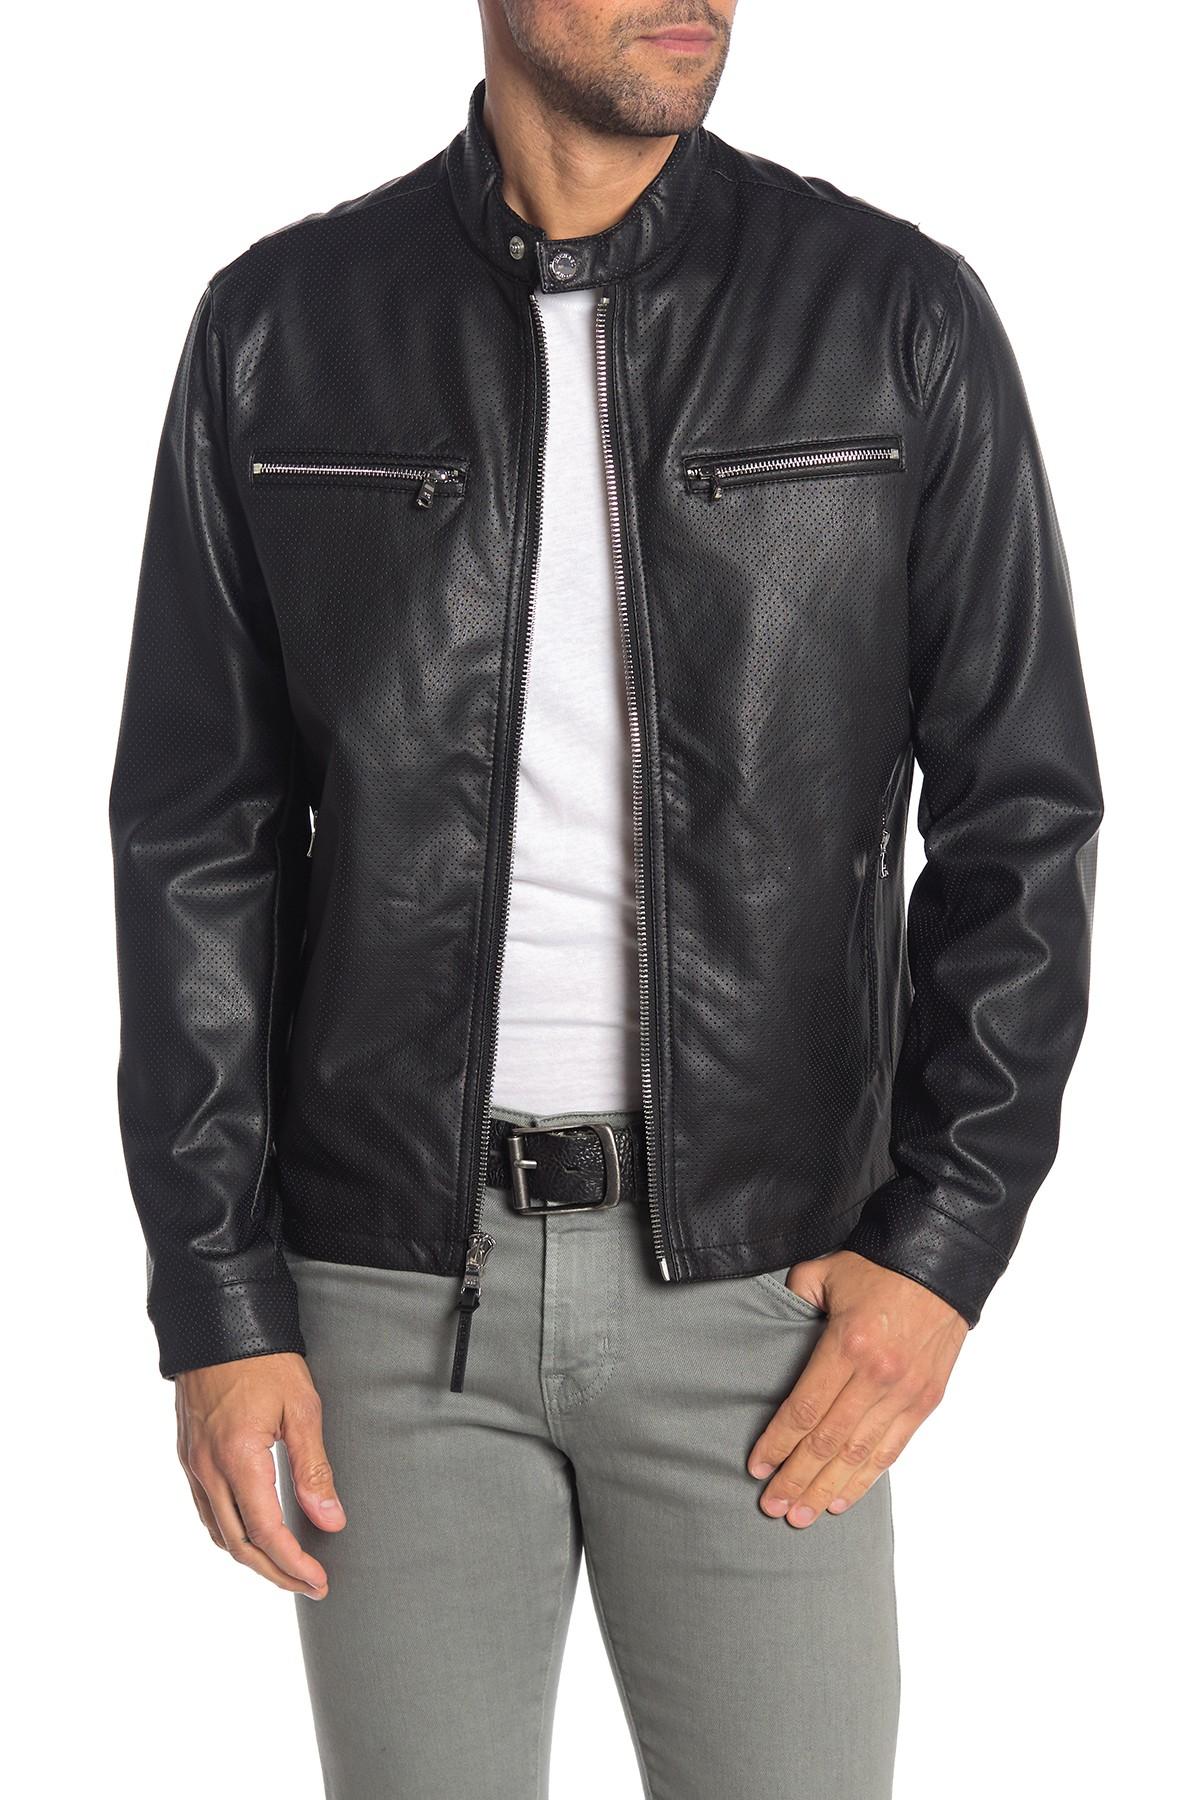 Michael Kors Lisbon Perforated Faux Leather Moto Jacket in Black for Men -  Lyst